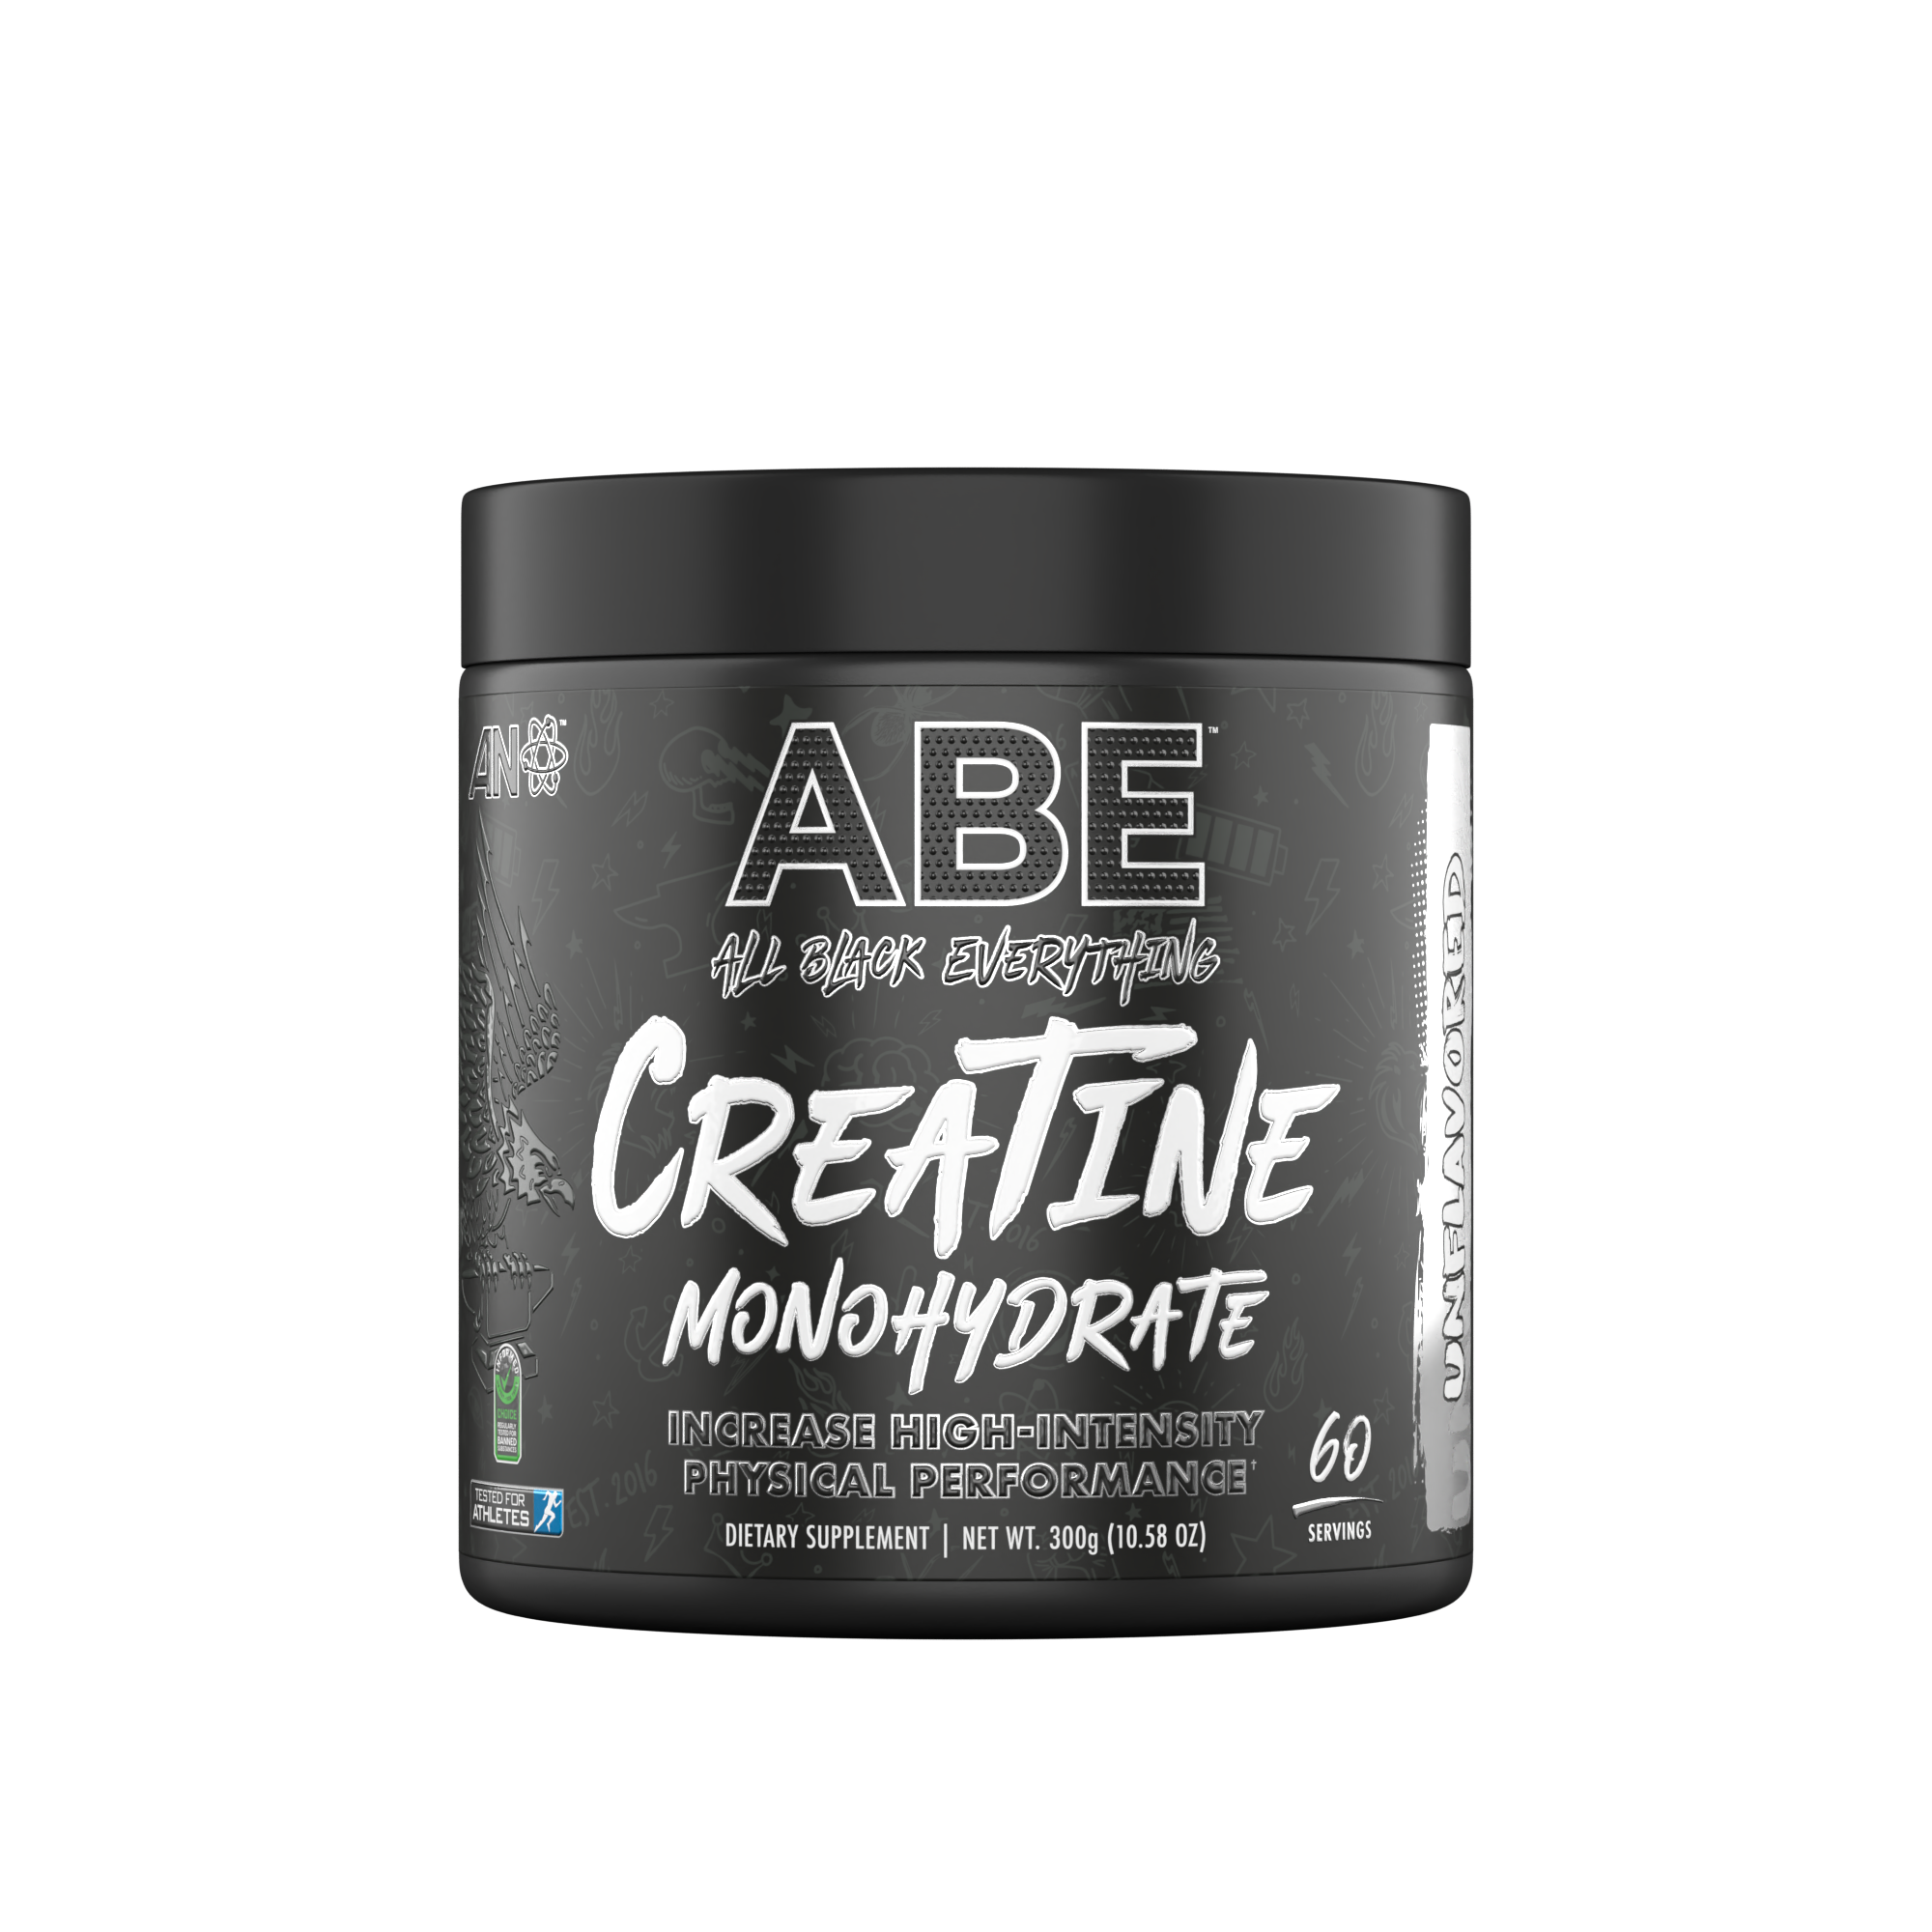 Unflavored Creatine Monohydrate 300g (10.58oz) - 60 servings